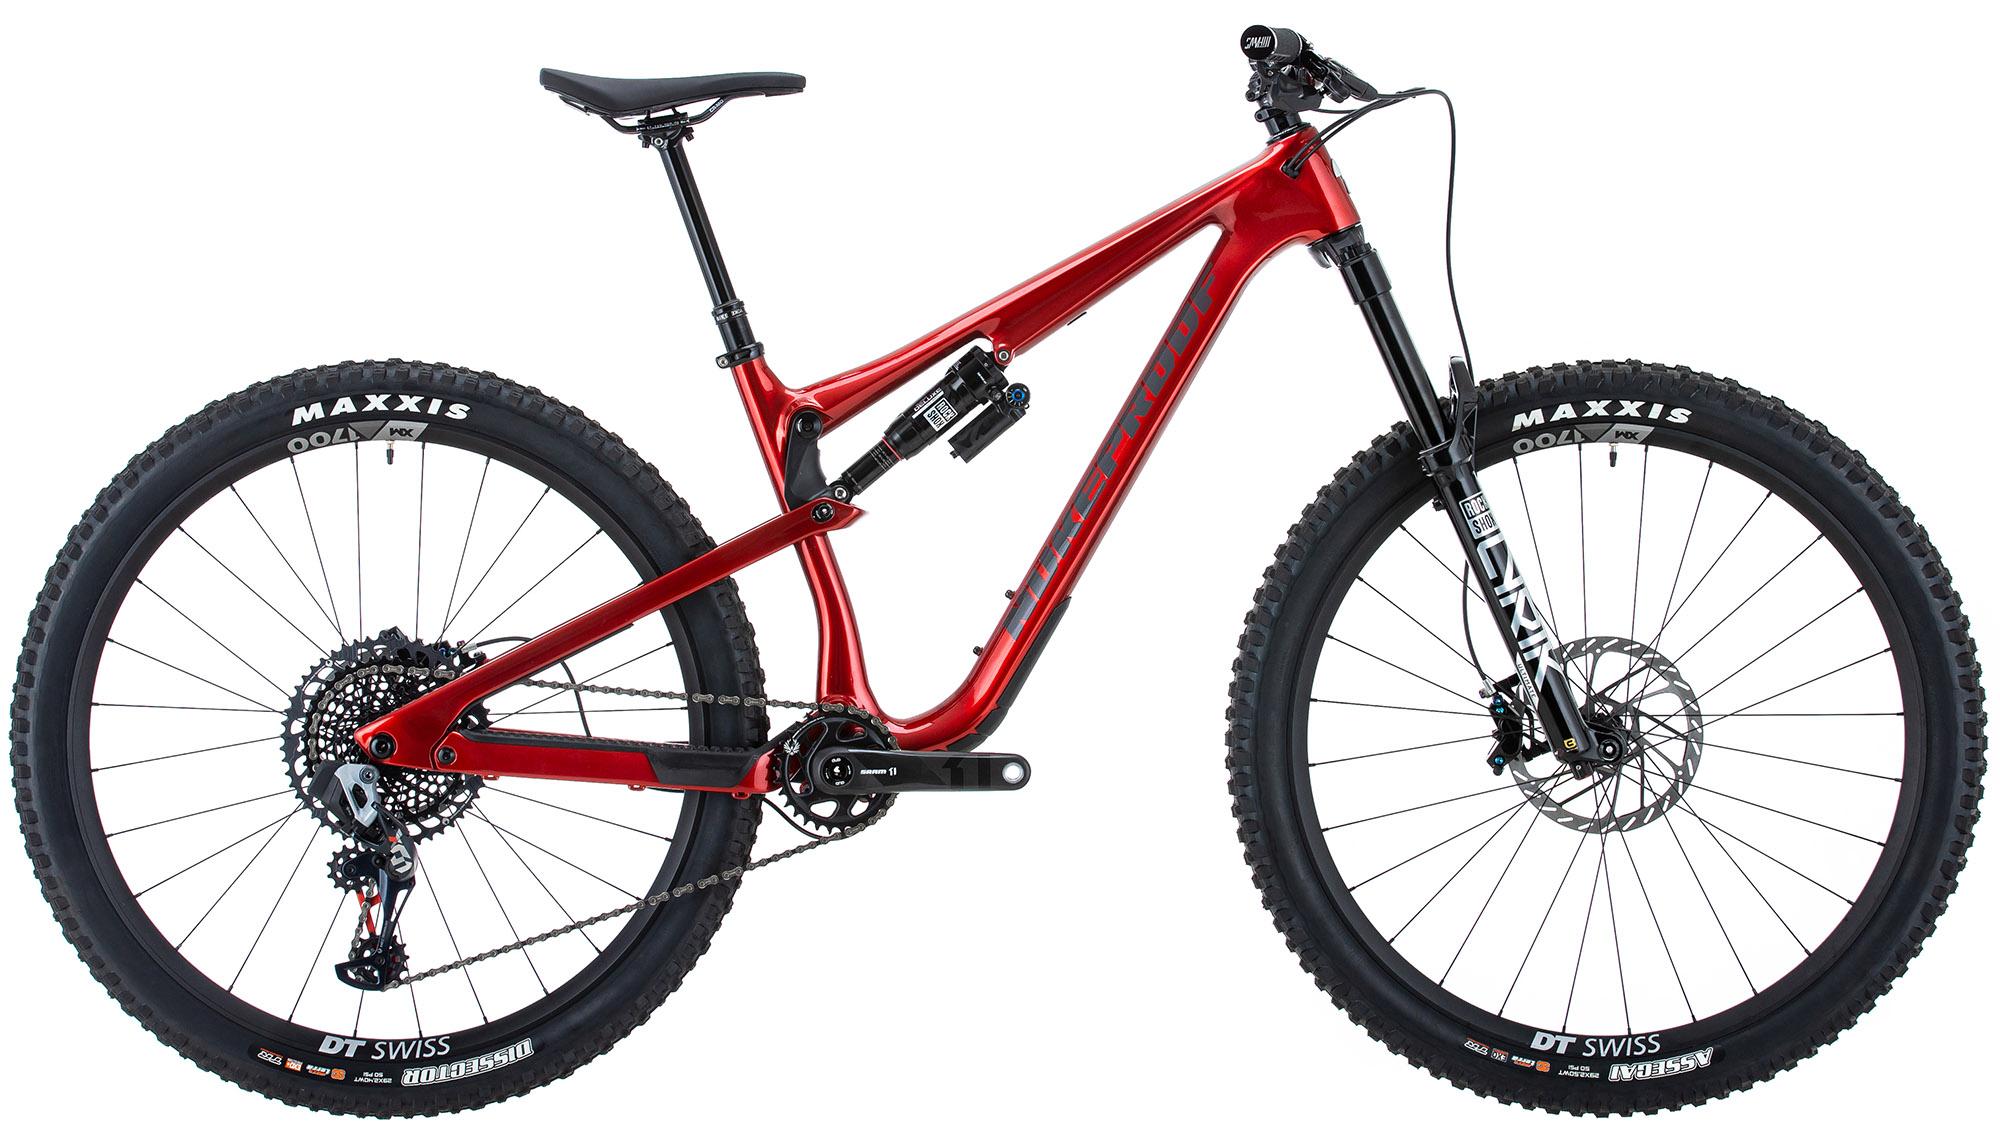 Nukeproof Reactor 290 Rs Carbon Mountain Bike (x01 Axs) - Racing Red